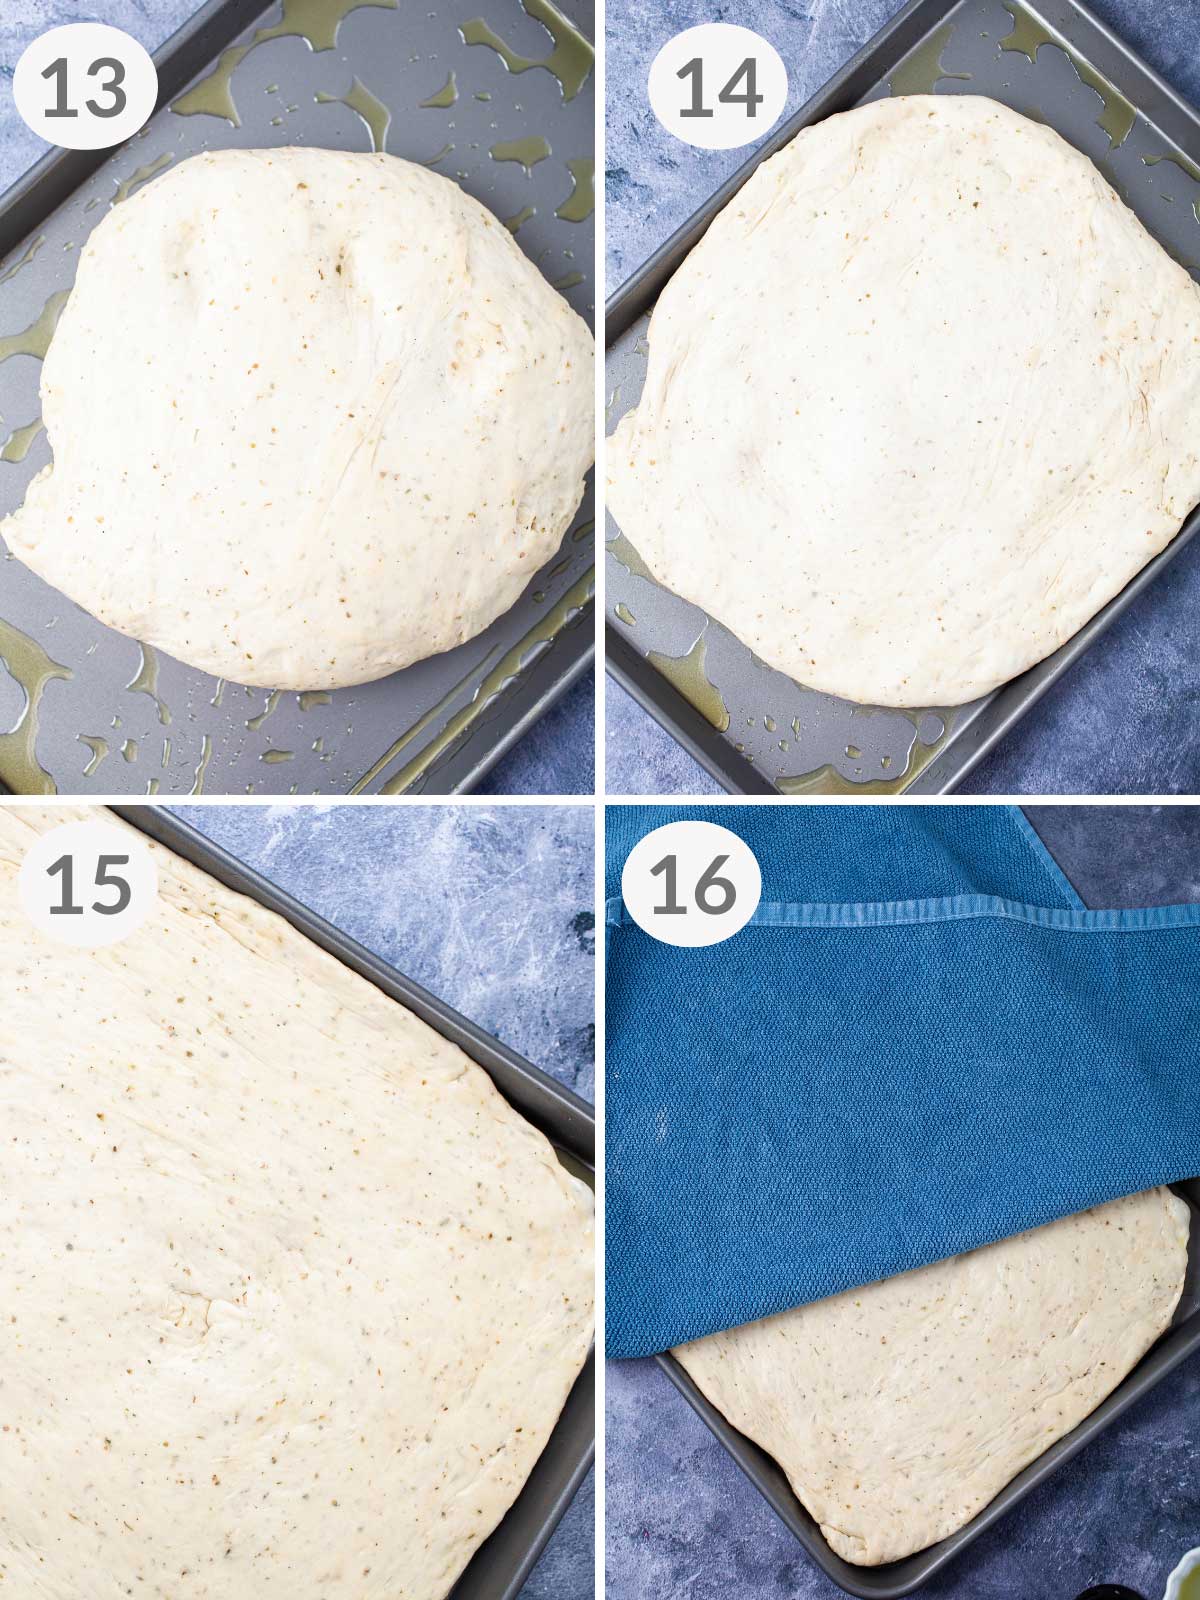 A series of steps on how to give pizza dough a rise and shape it into a rectangular shape.